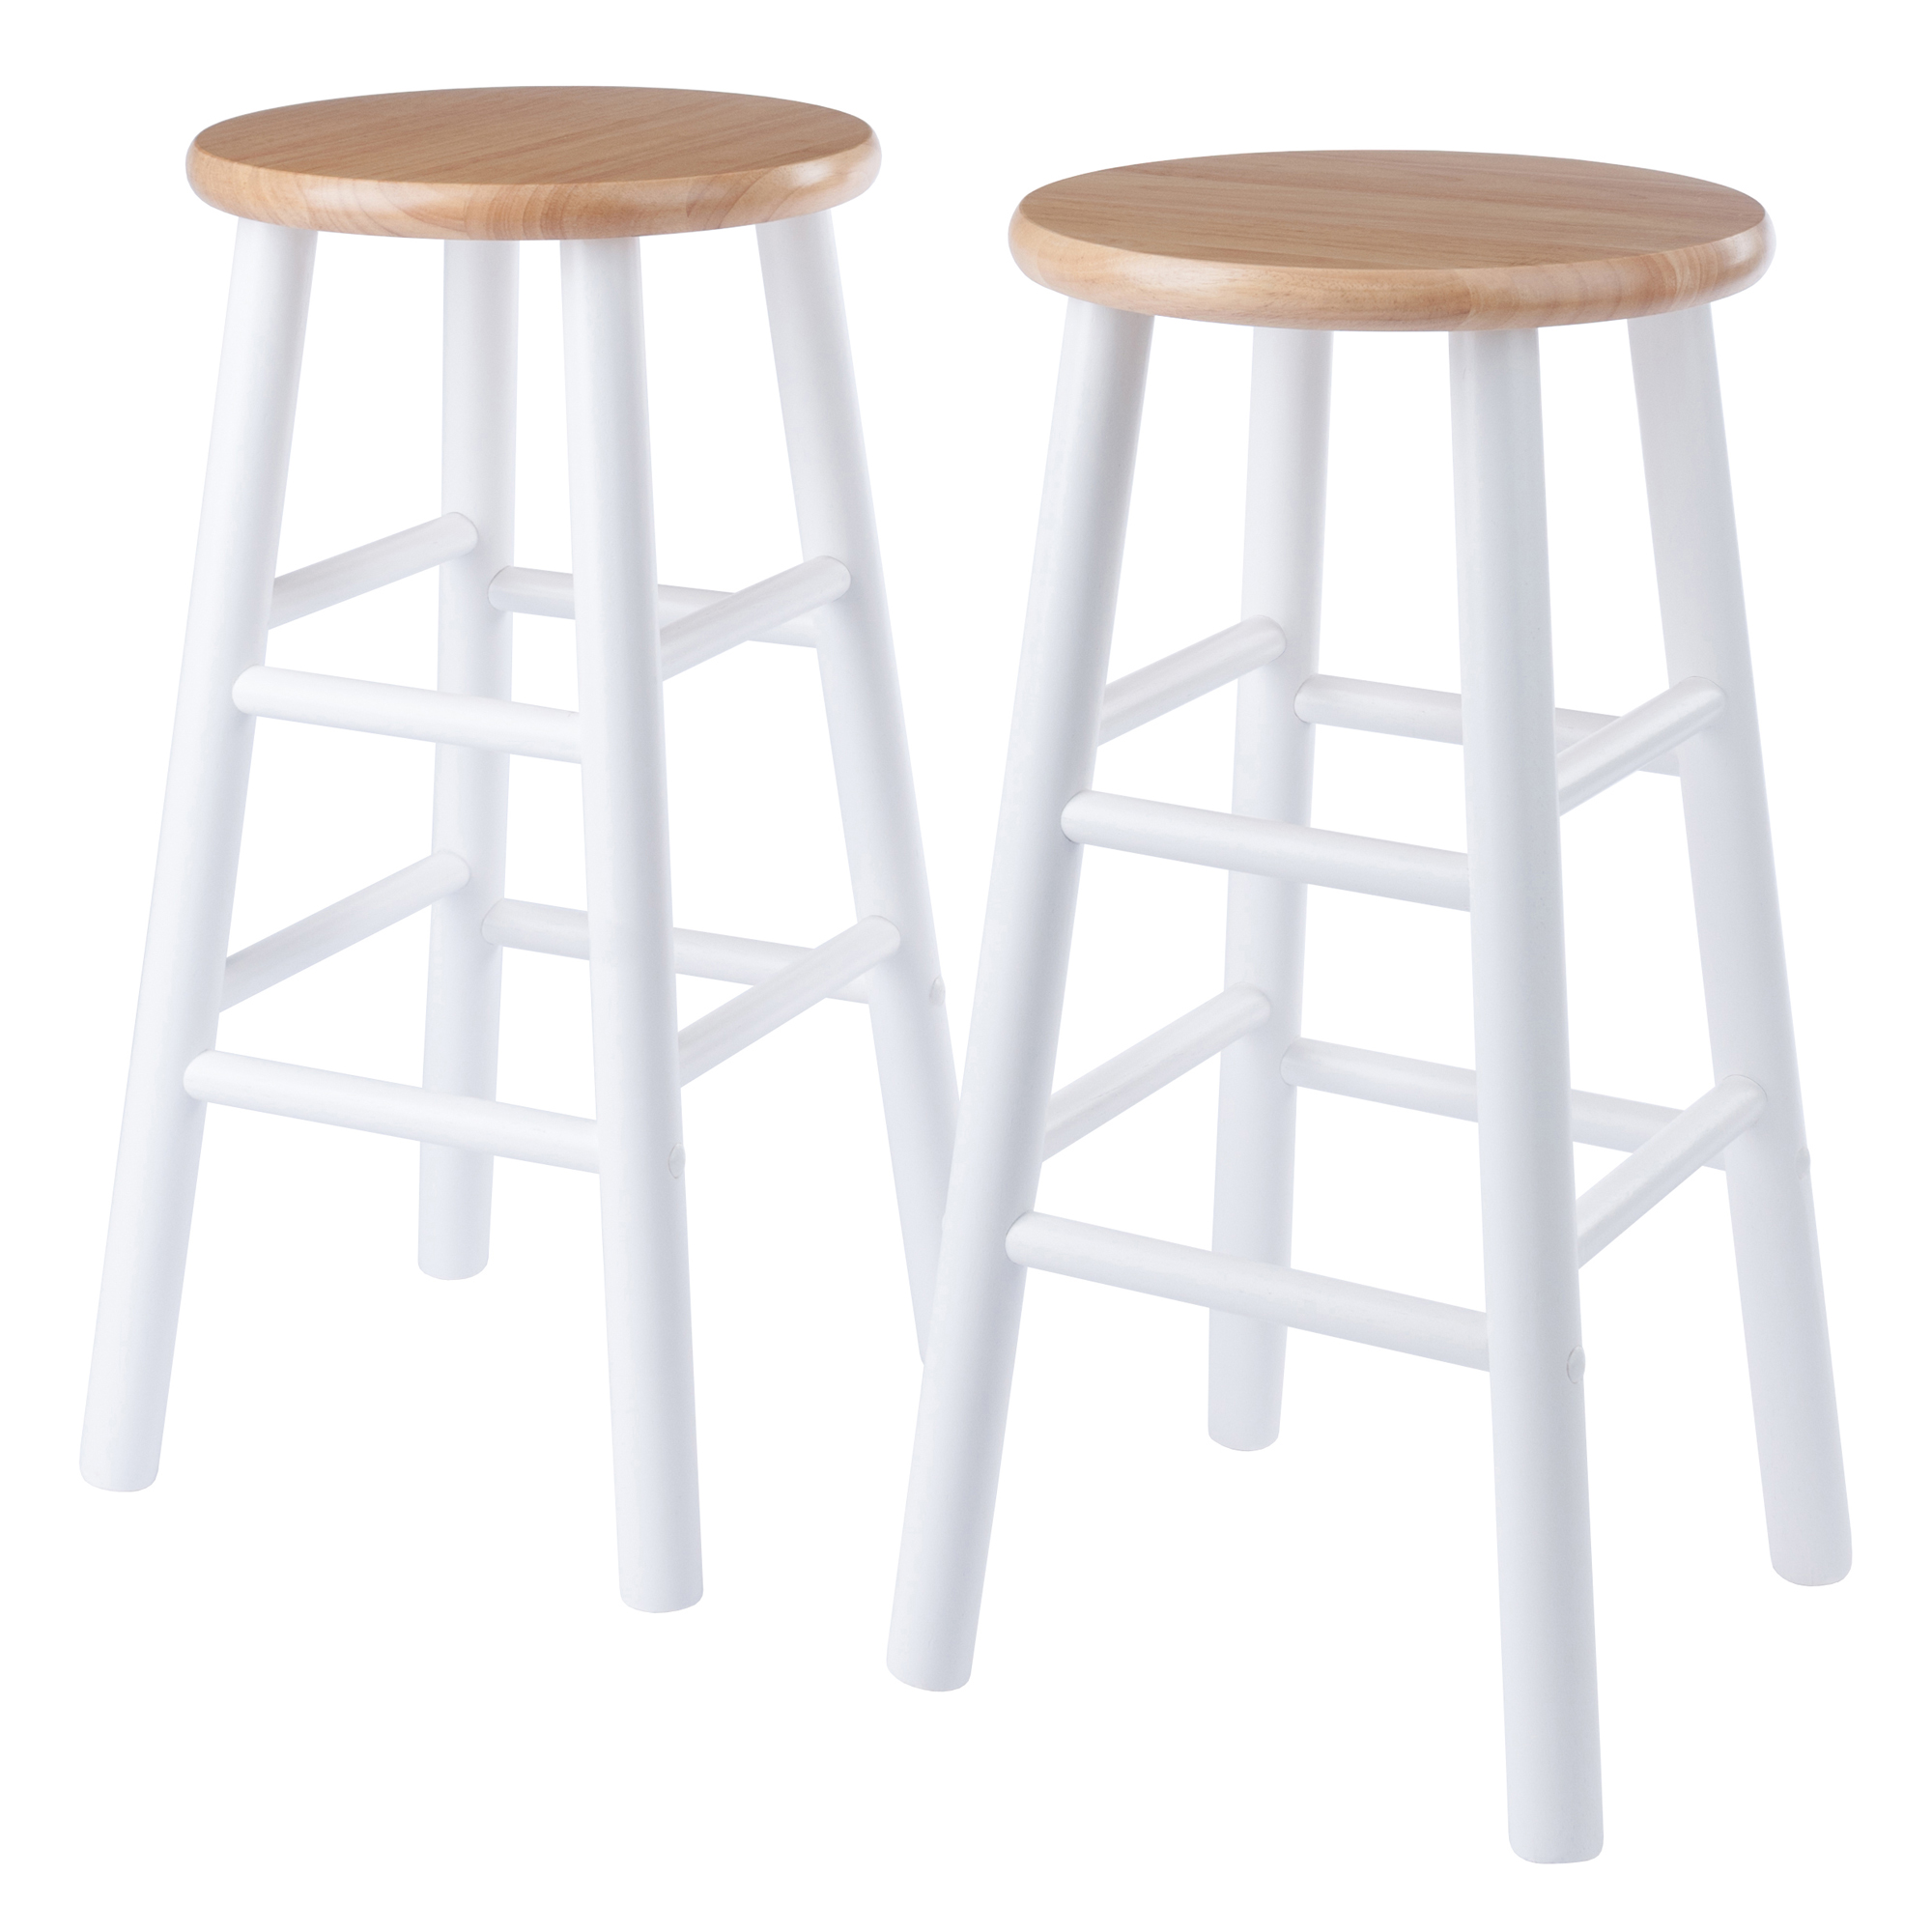 Winsome Wood Huxton 2-Piece Counter Stools, Natural & White Finish - image 1 of 10